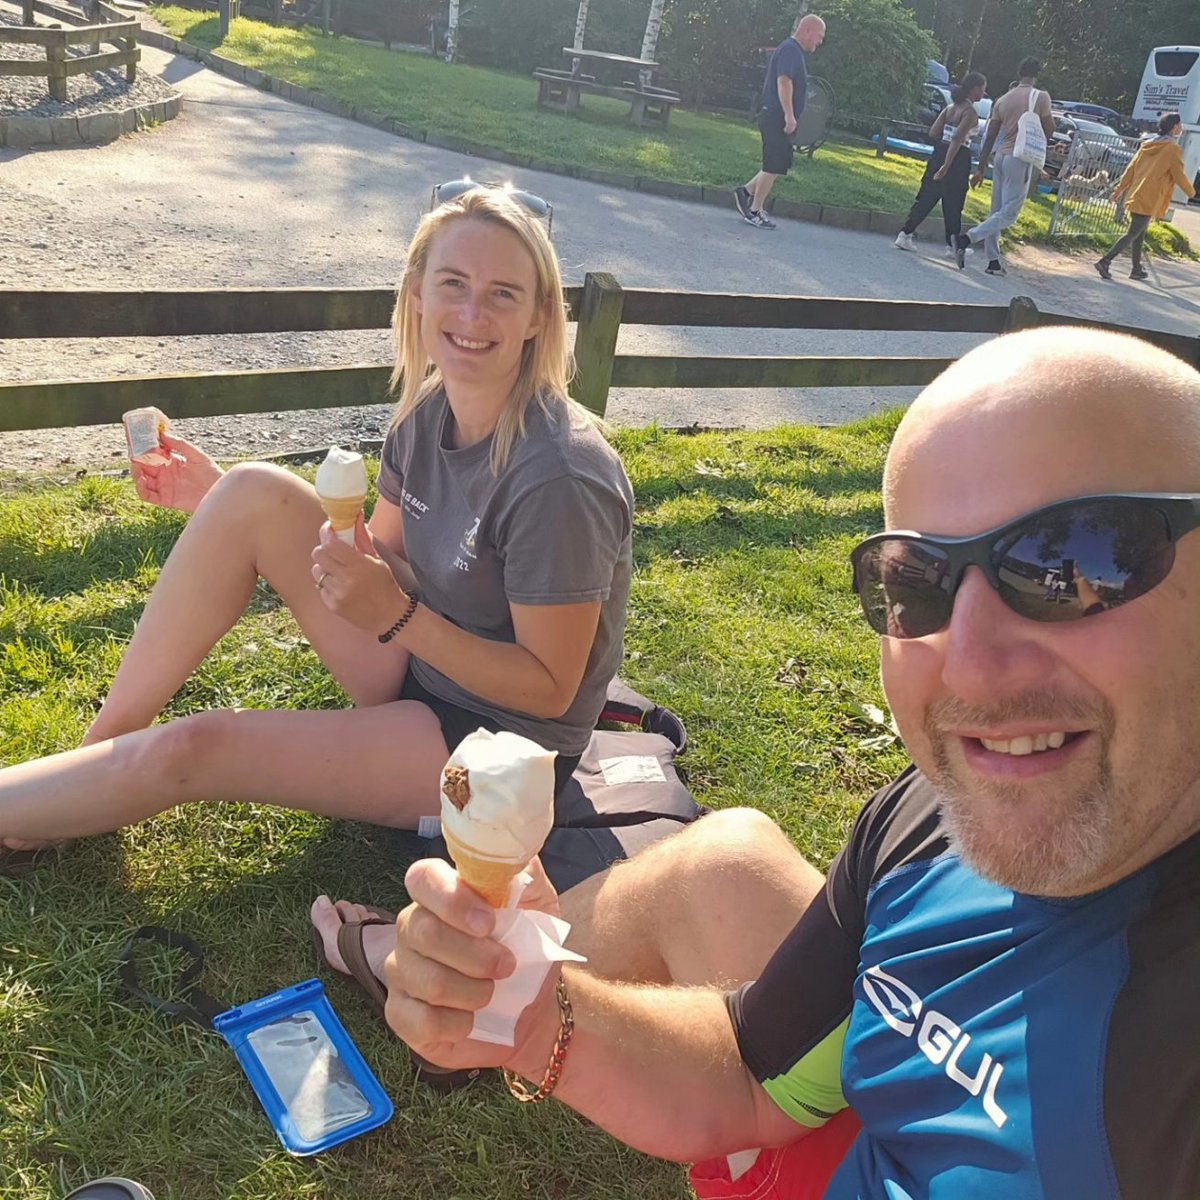 Little trip to Coniston this afternoon with @hlmel88 & Bertie 🐶 for a little paddleboarding in the sun 🌞. We paddled up to the Bluebird cafe for an ice cream 🍦 before leisurely paddling back. @aquaplanet @mistral_int #lastminutetrip